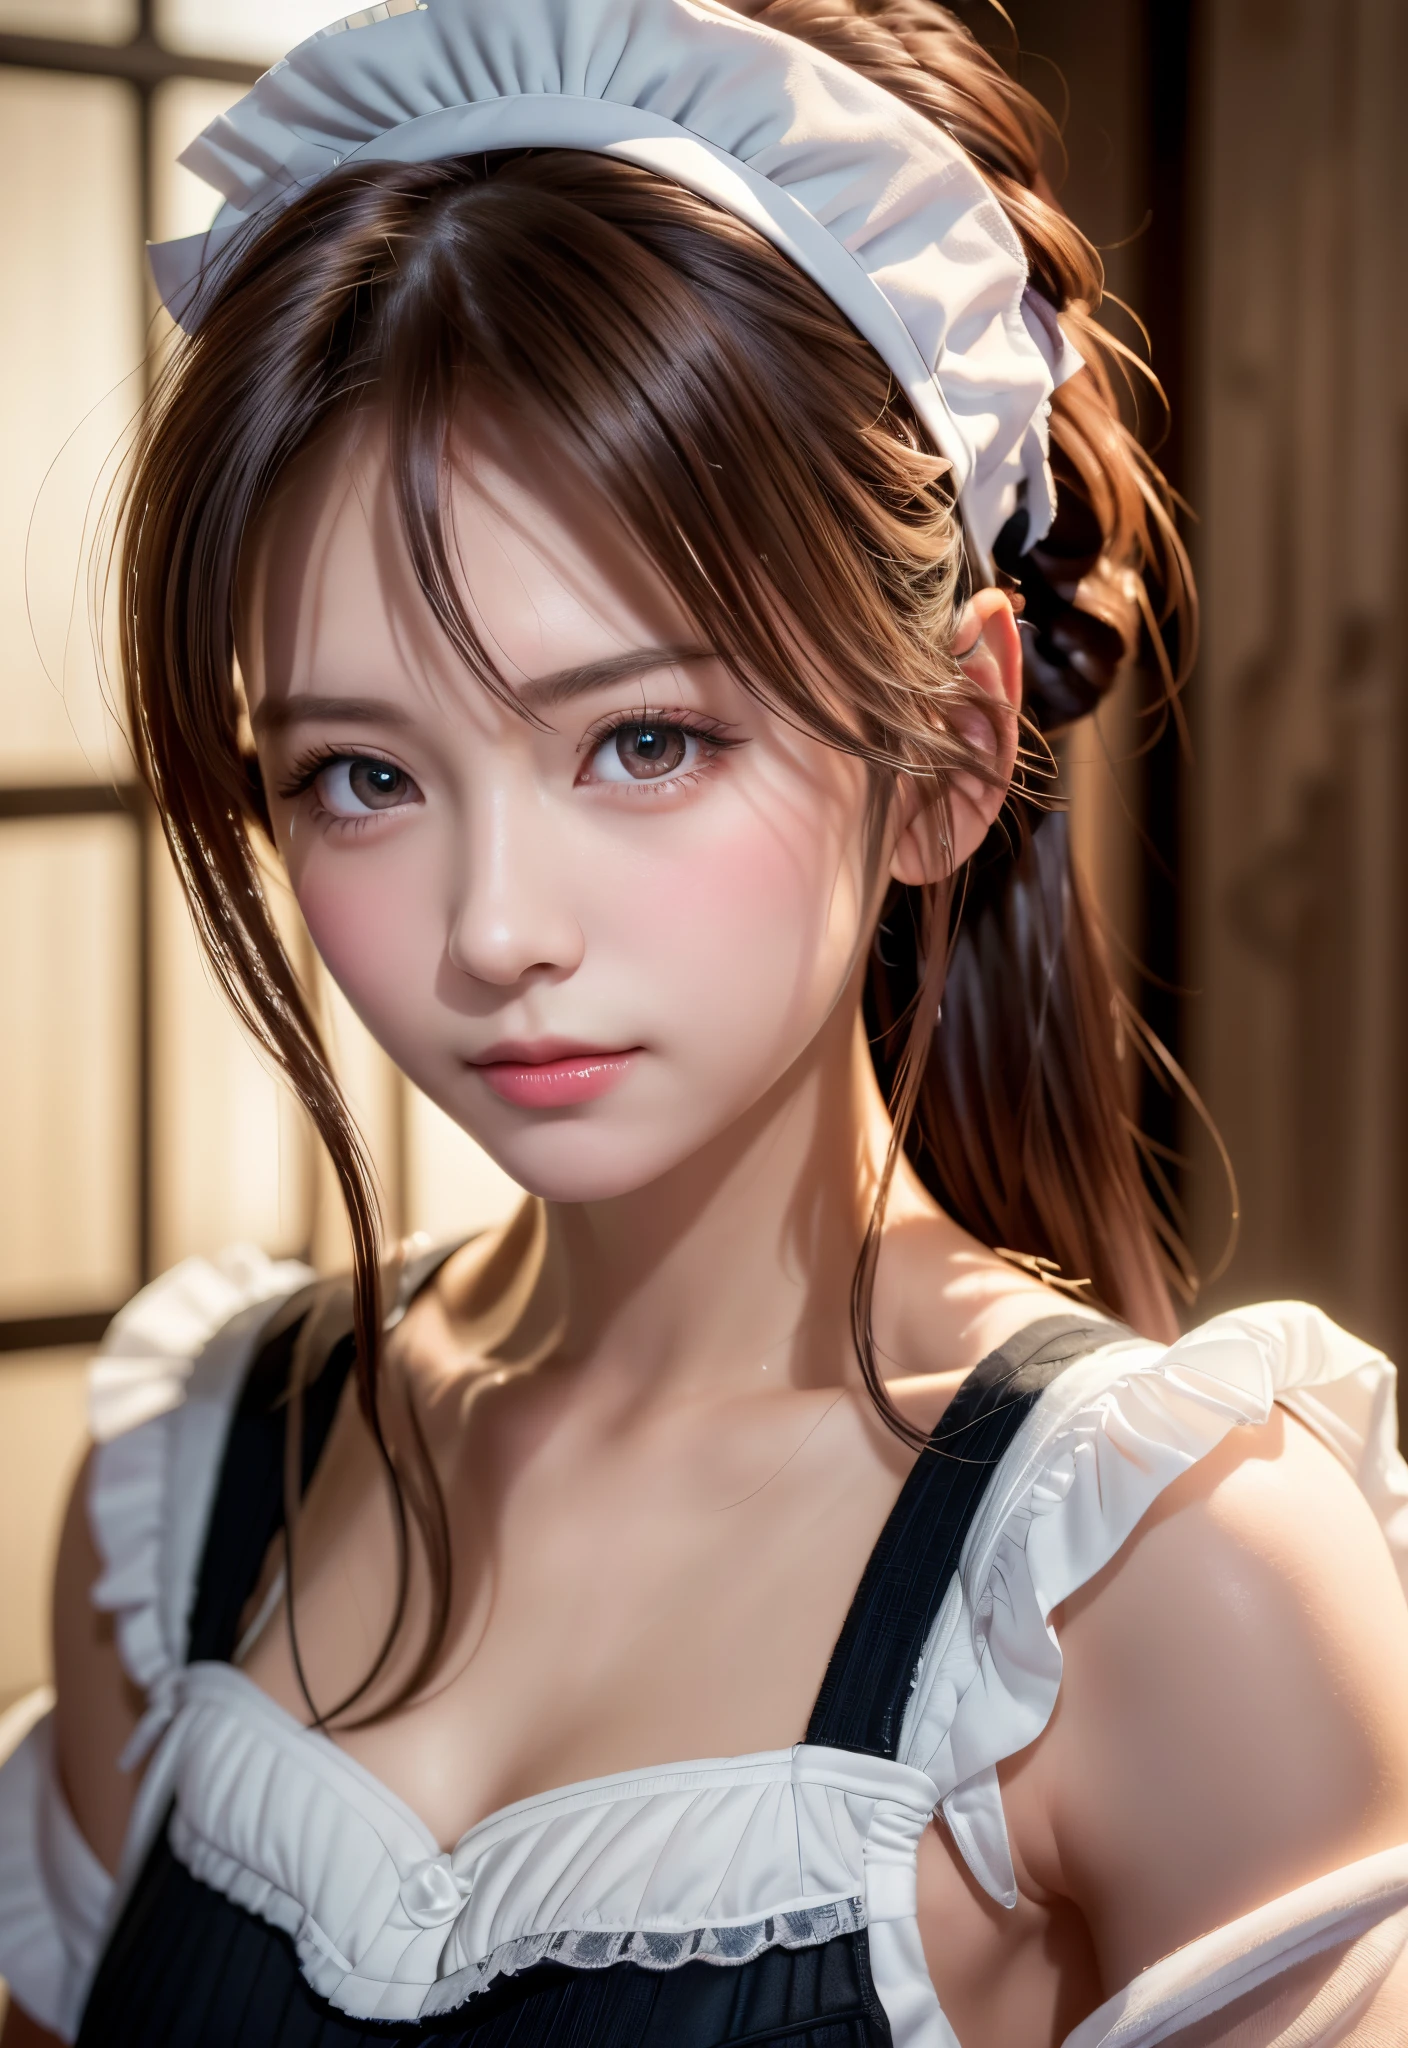 8K, of the highest quality, masutepiece:1.2), (Realistic, Photorealsitic:1.37), of the highest quality, masutepiece, Beautiful young woman, Pensive expression,、A charming、and an inviting look, Cute Maid Clothes, Hair tied back, Cinematic background, Light skin tone